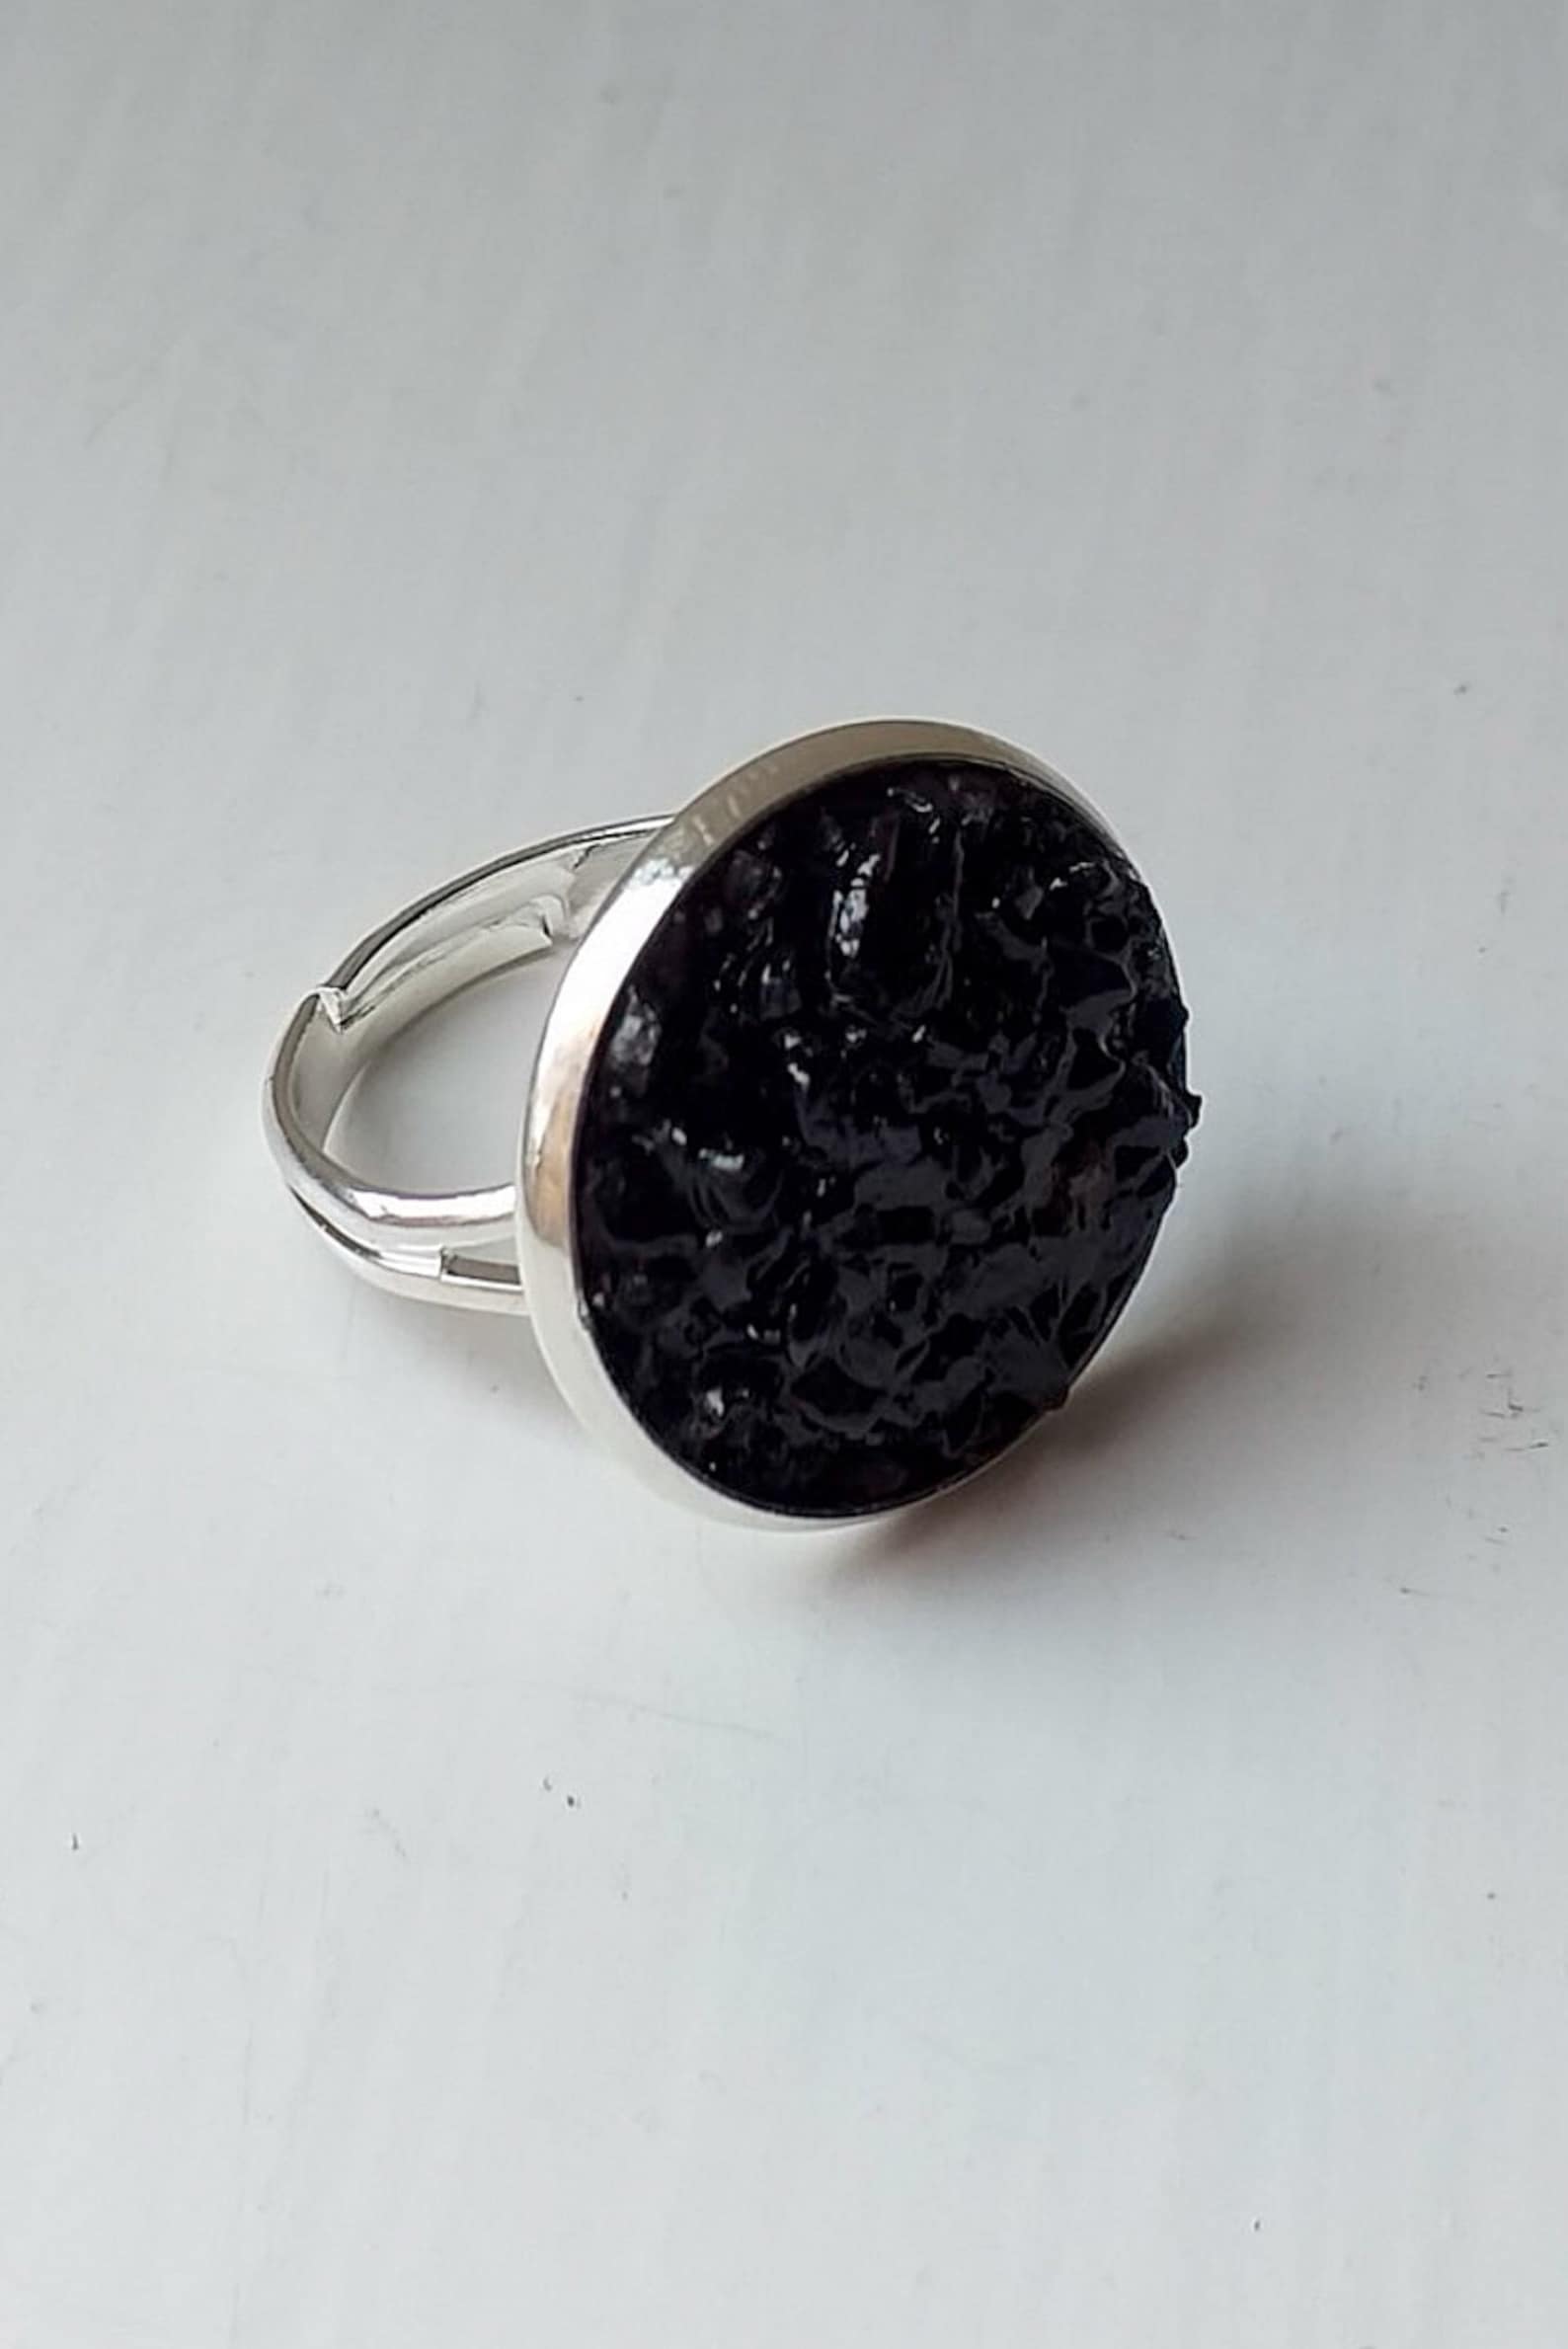 Authentic Anthracite/coal Ring Industrial Designed Coal Ring - Etsy